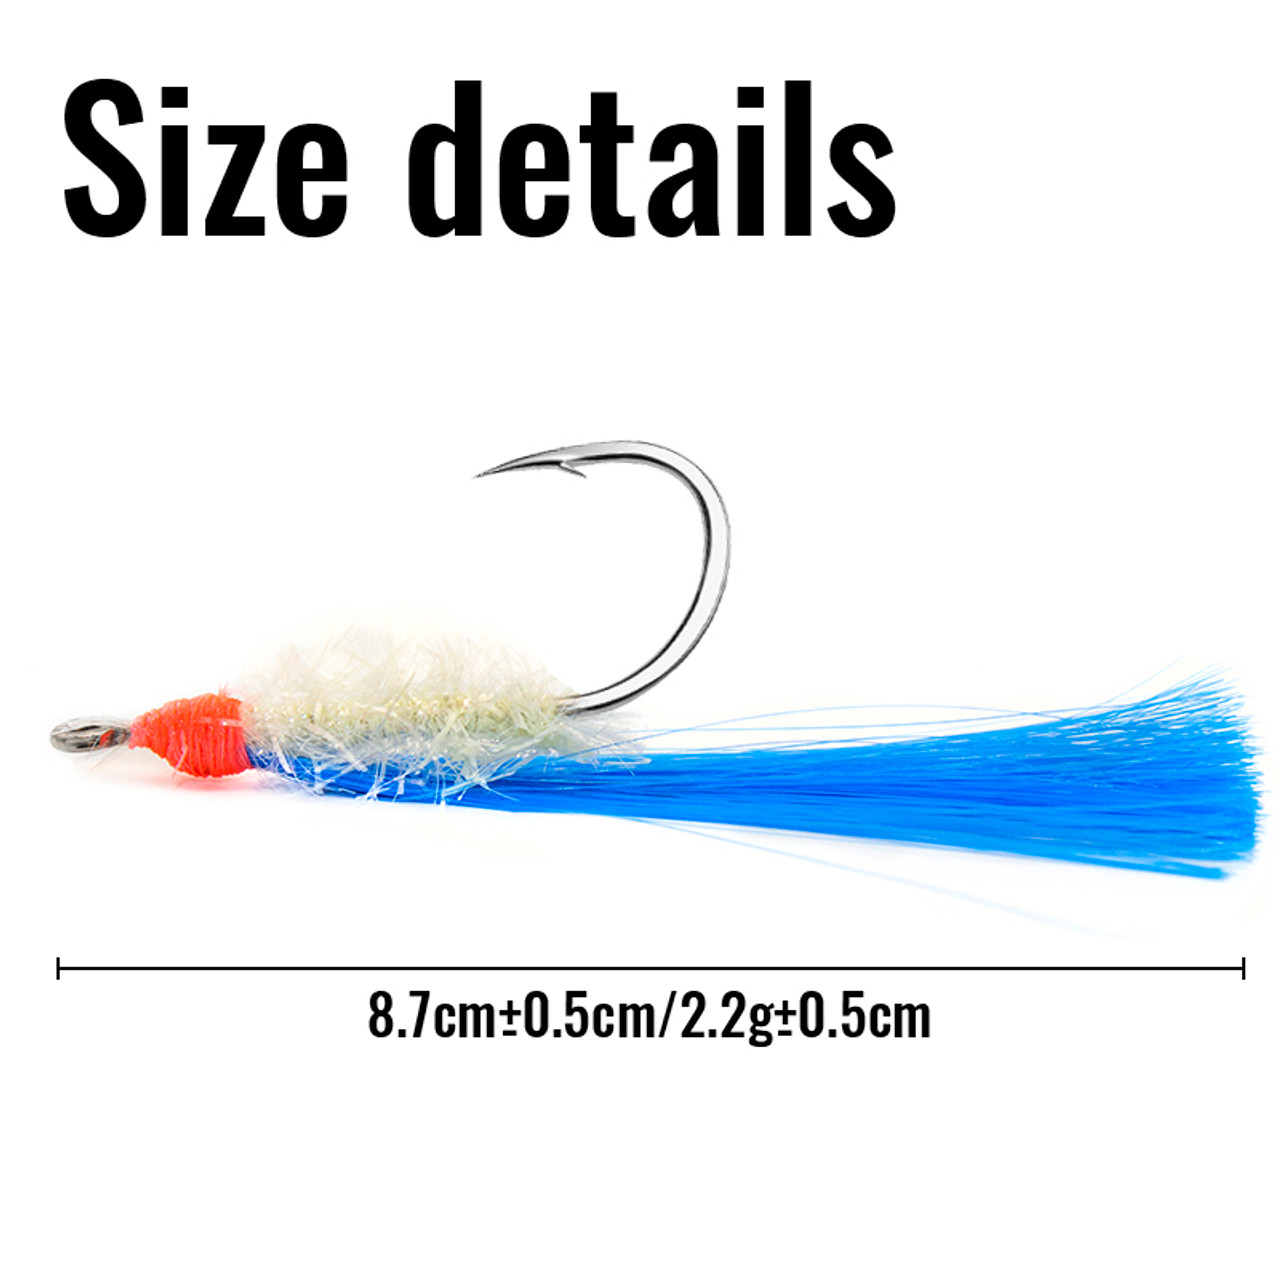 Halibut Saltwater Fishing Baits, Lures & Flies for sale